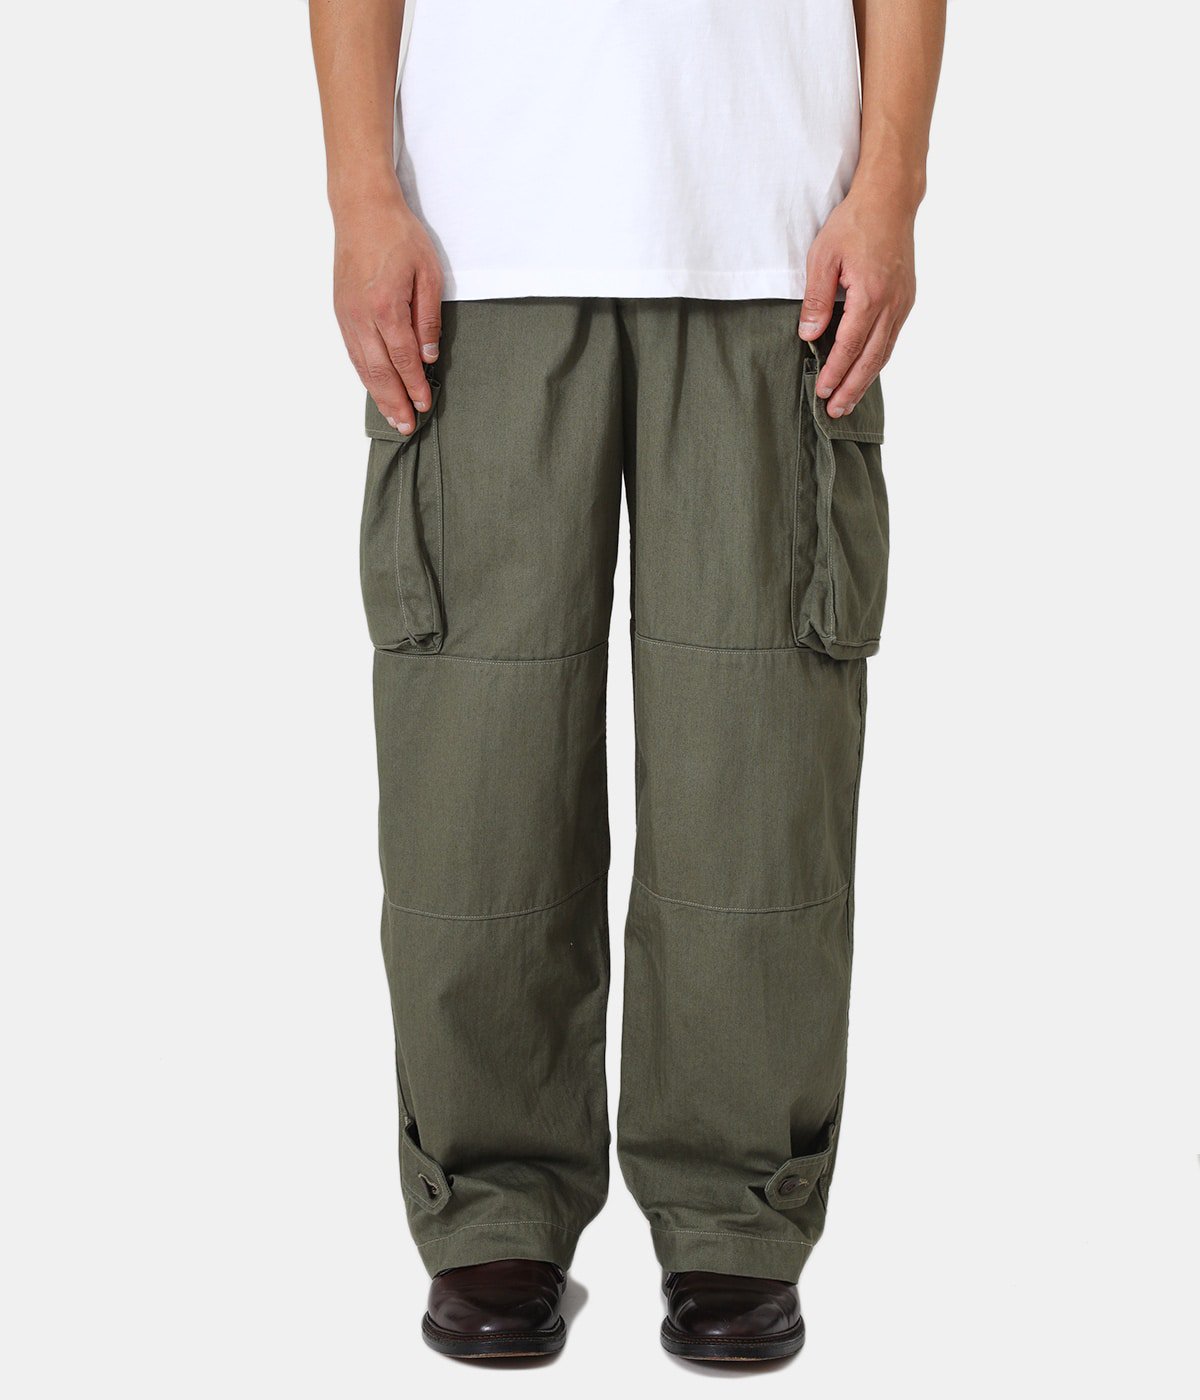 M-47 FRENCH ARMY CARGO PANTS